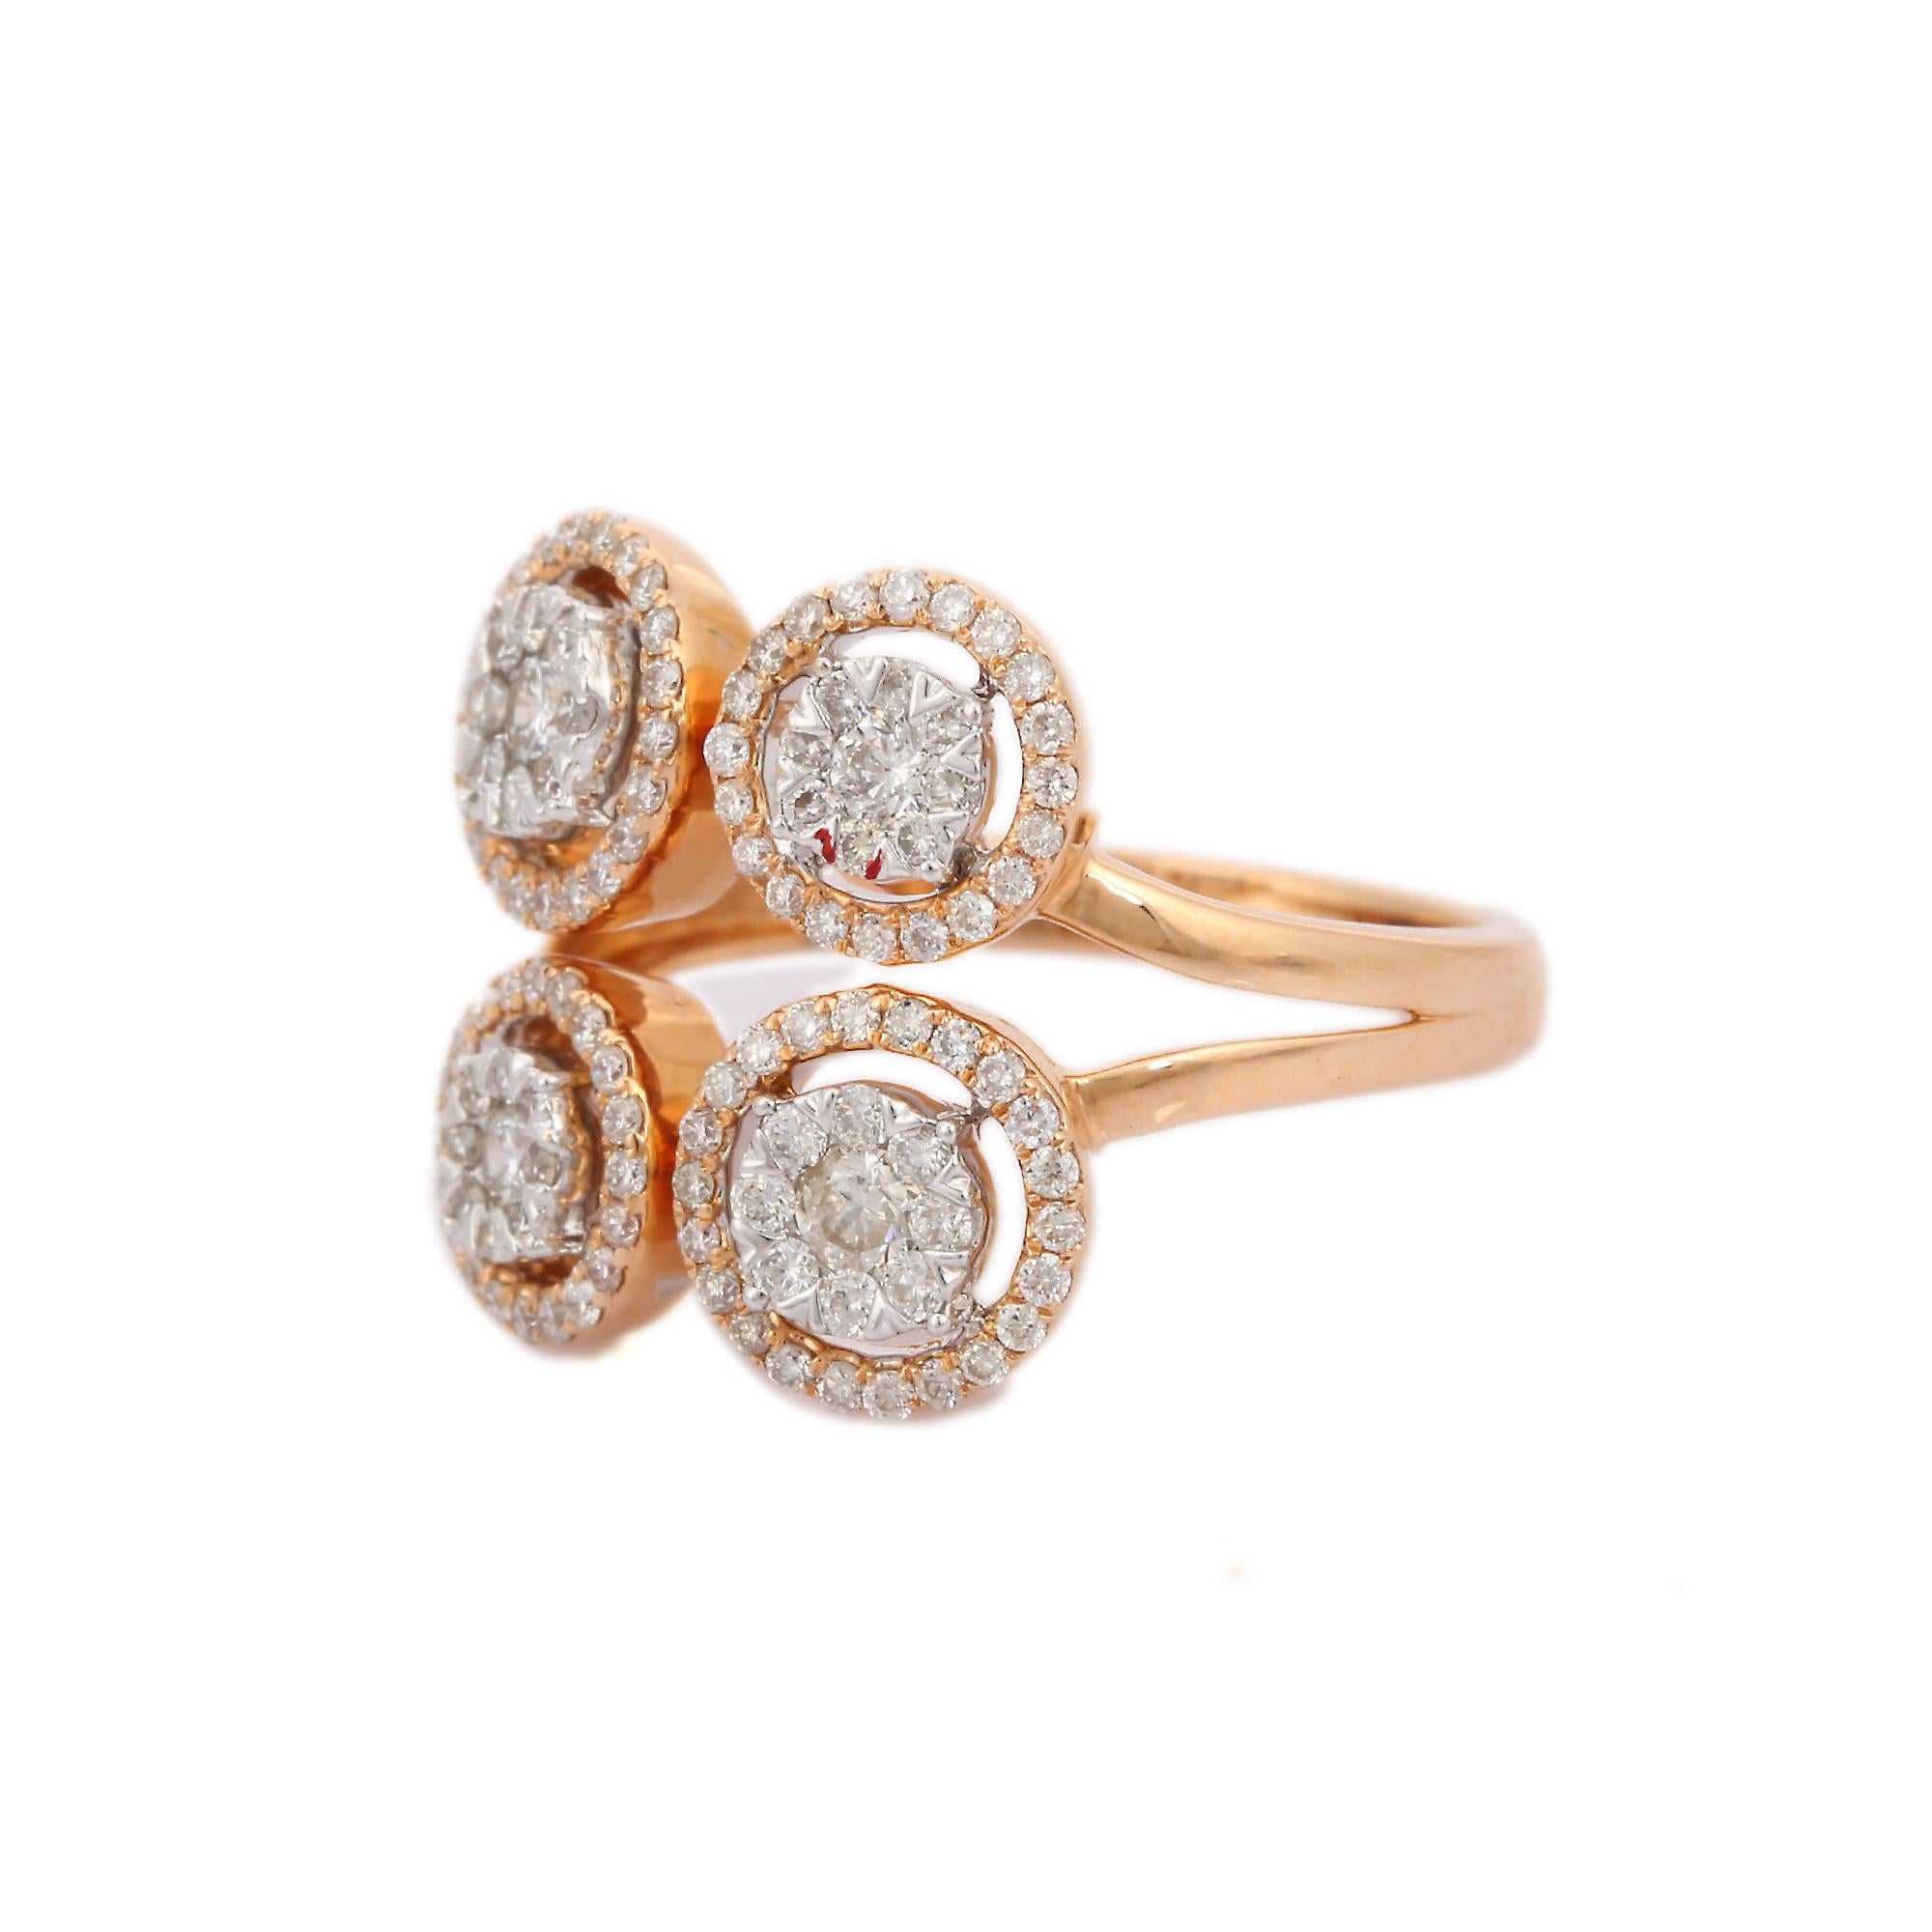 For Sale:  Statement Illusion Diamond Wedding Cluster Ring in 18K Solid Rose Gold 4